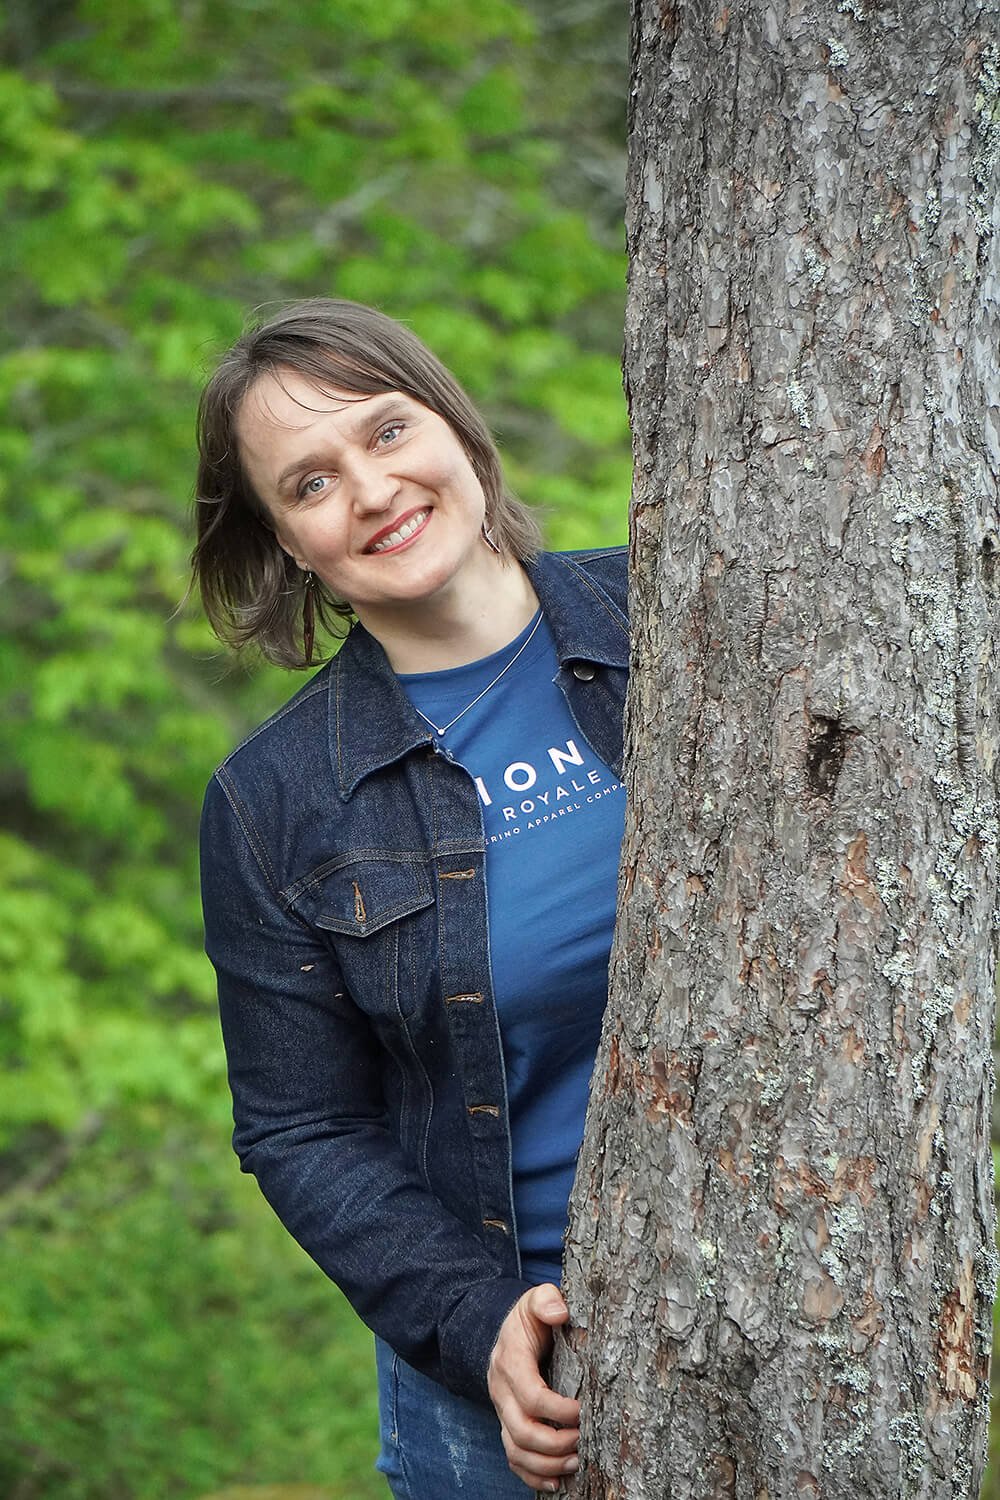 Kaisu Maijala, a forest bathing instructor, is an expert in nature well-being